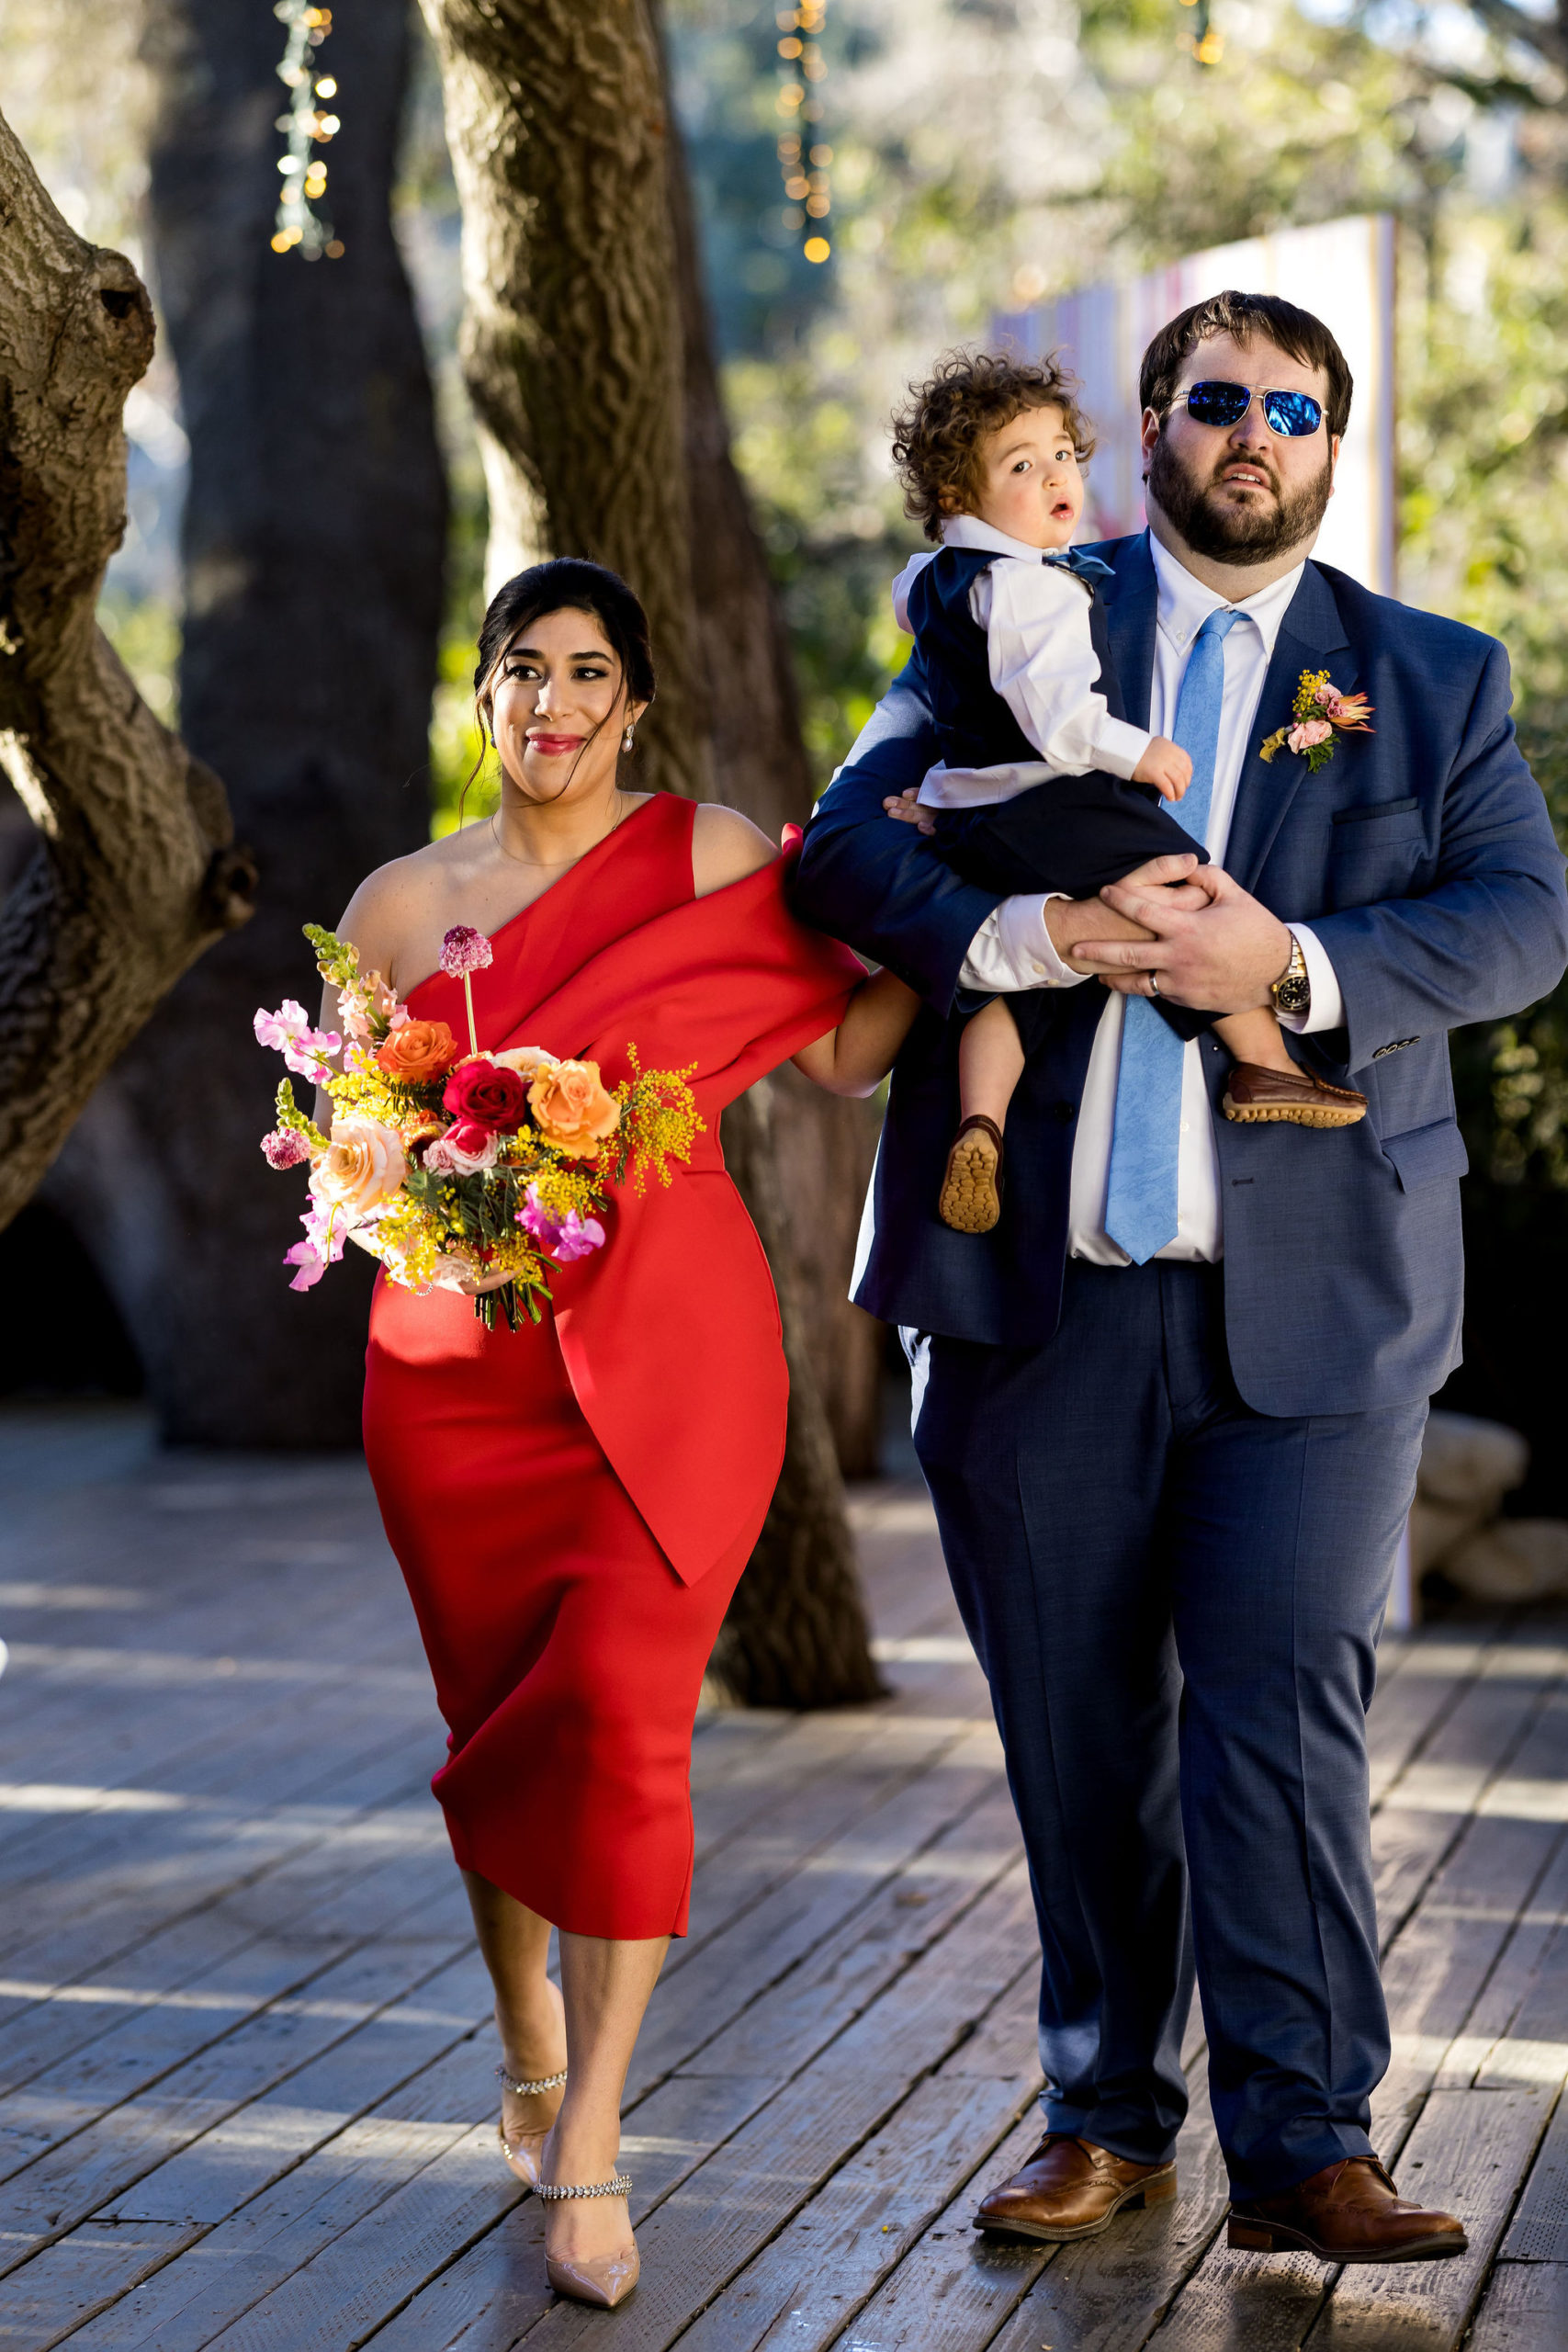 bridesmaid in modern red dress walks down aisle with groomsman in blue suit holding young ring bearer with blue vest